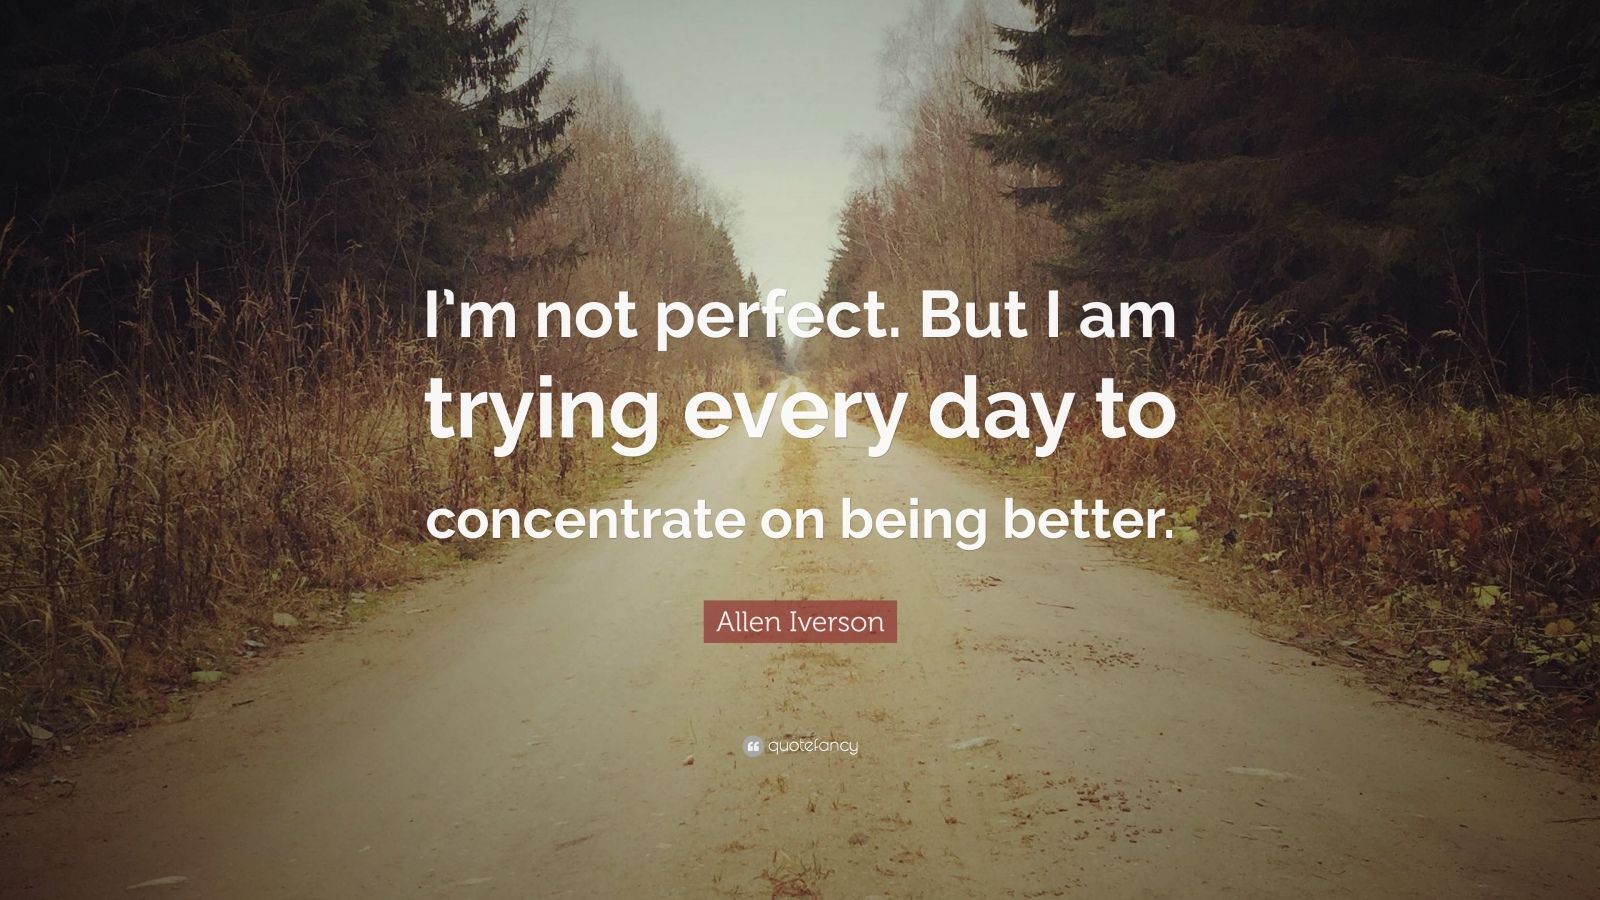 Allen Iverson Quote: “I’m not perfect. But I am trying every day to